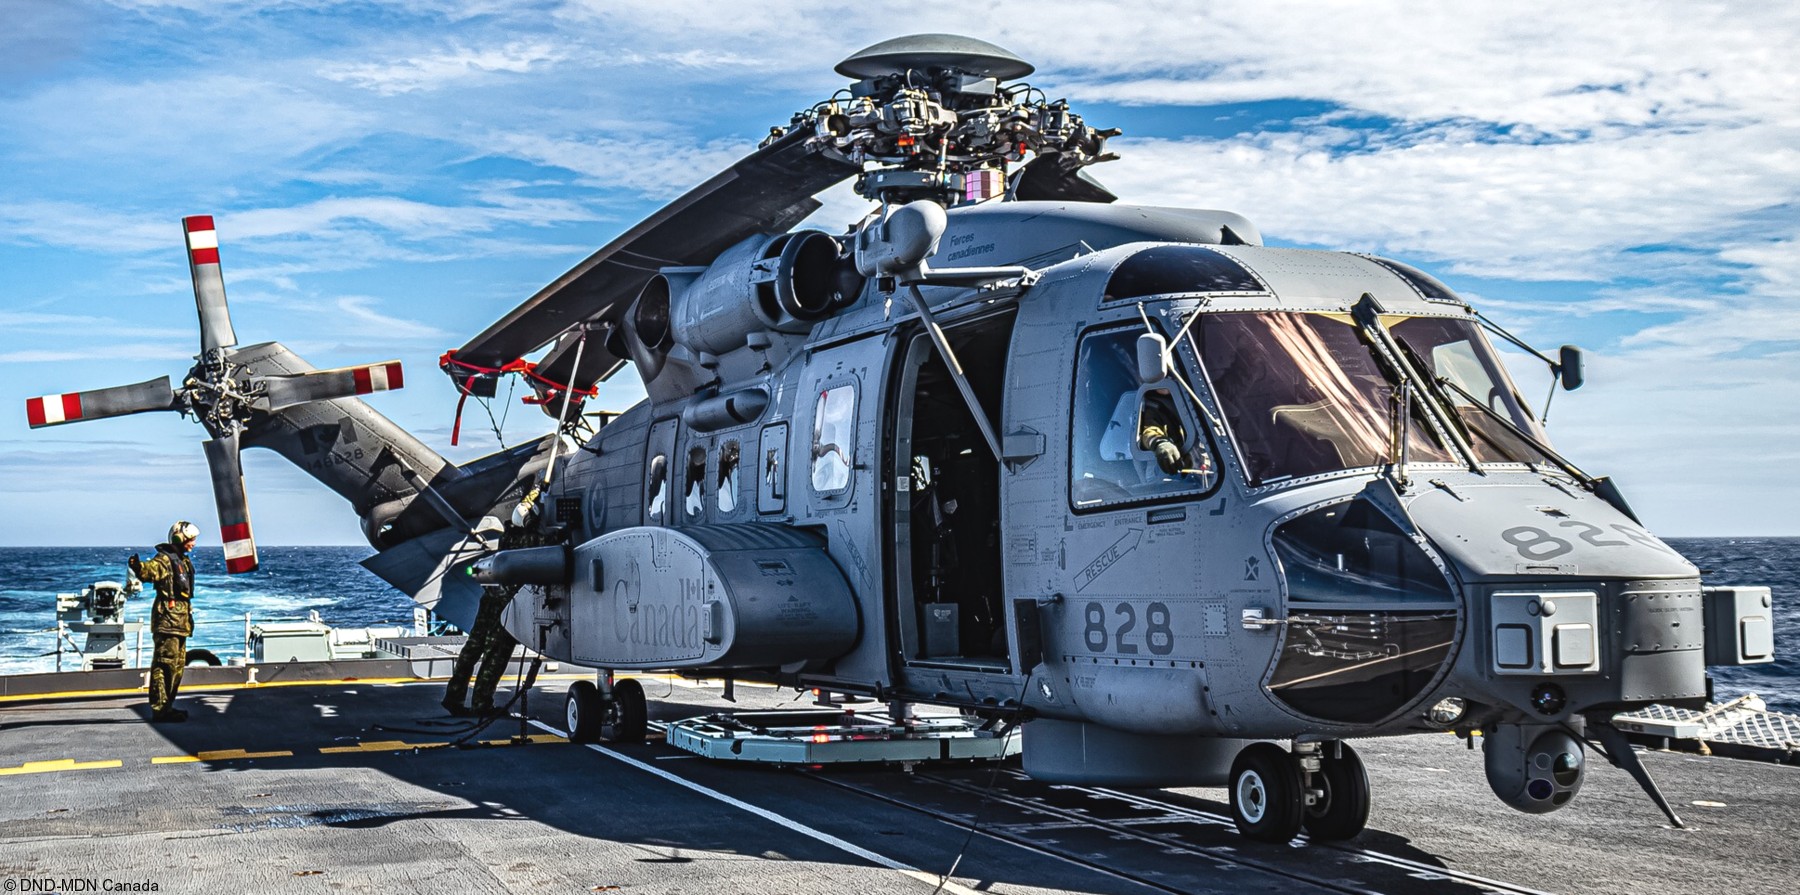 ch-148 cyclone naval helicopter royal canadian air force navy rcaf sikorsky hmcs 406 423 443 maritime squadron 37